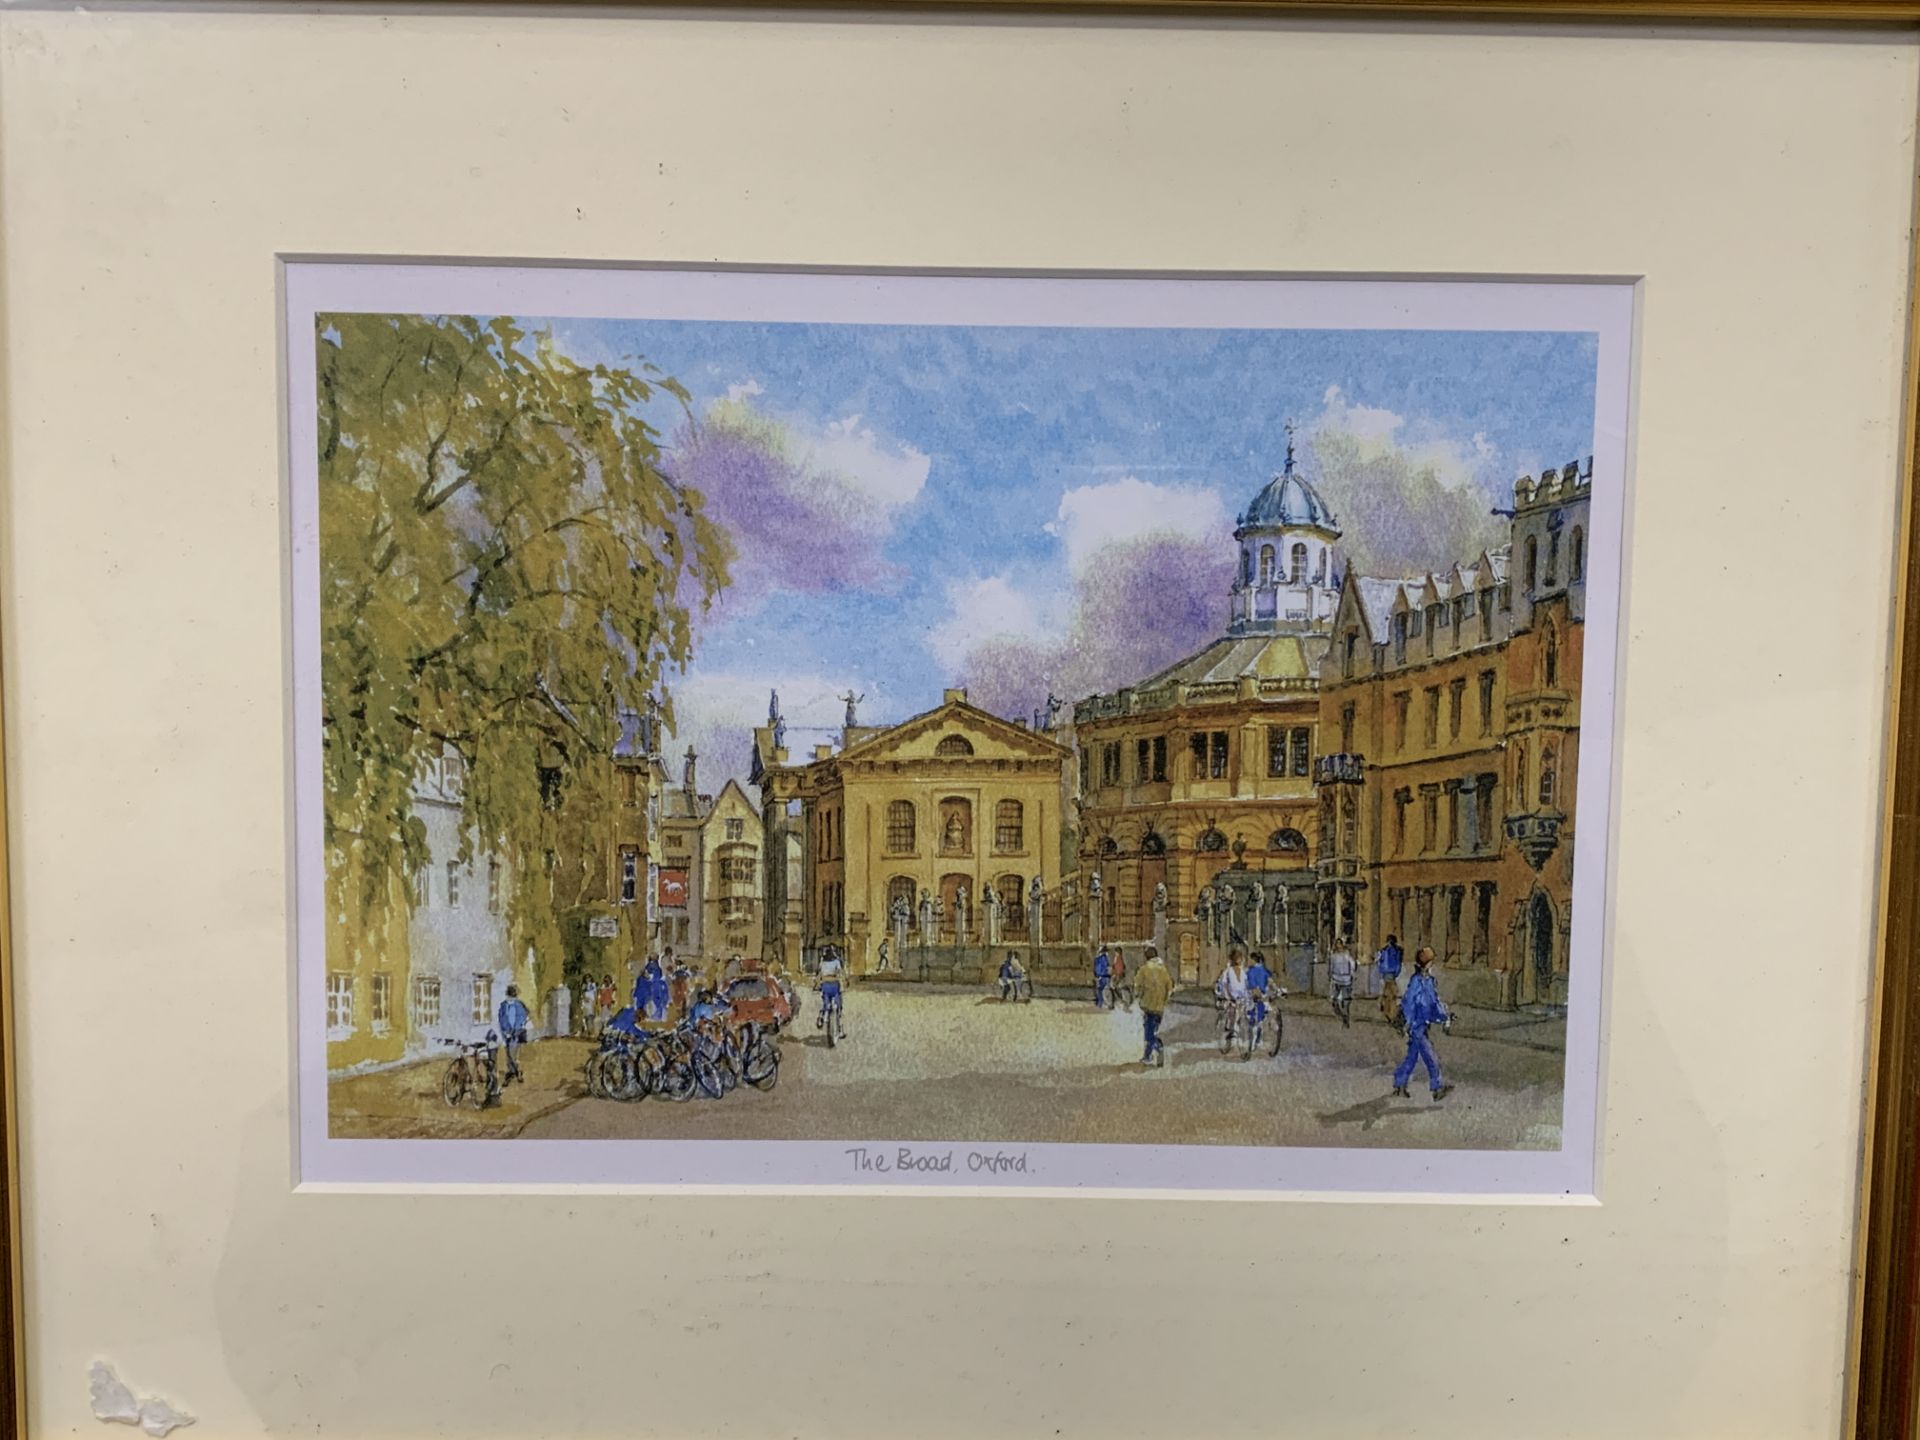 Four framed and glazed prints of Oxford scenes by Valerie Petts. This item carries VAT.